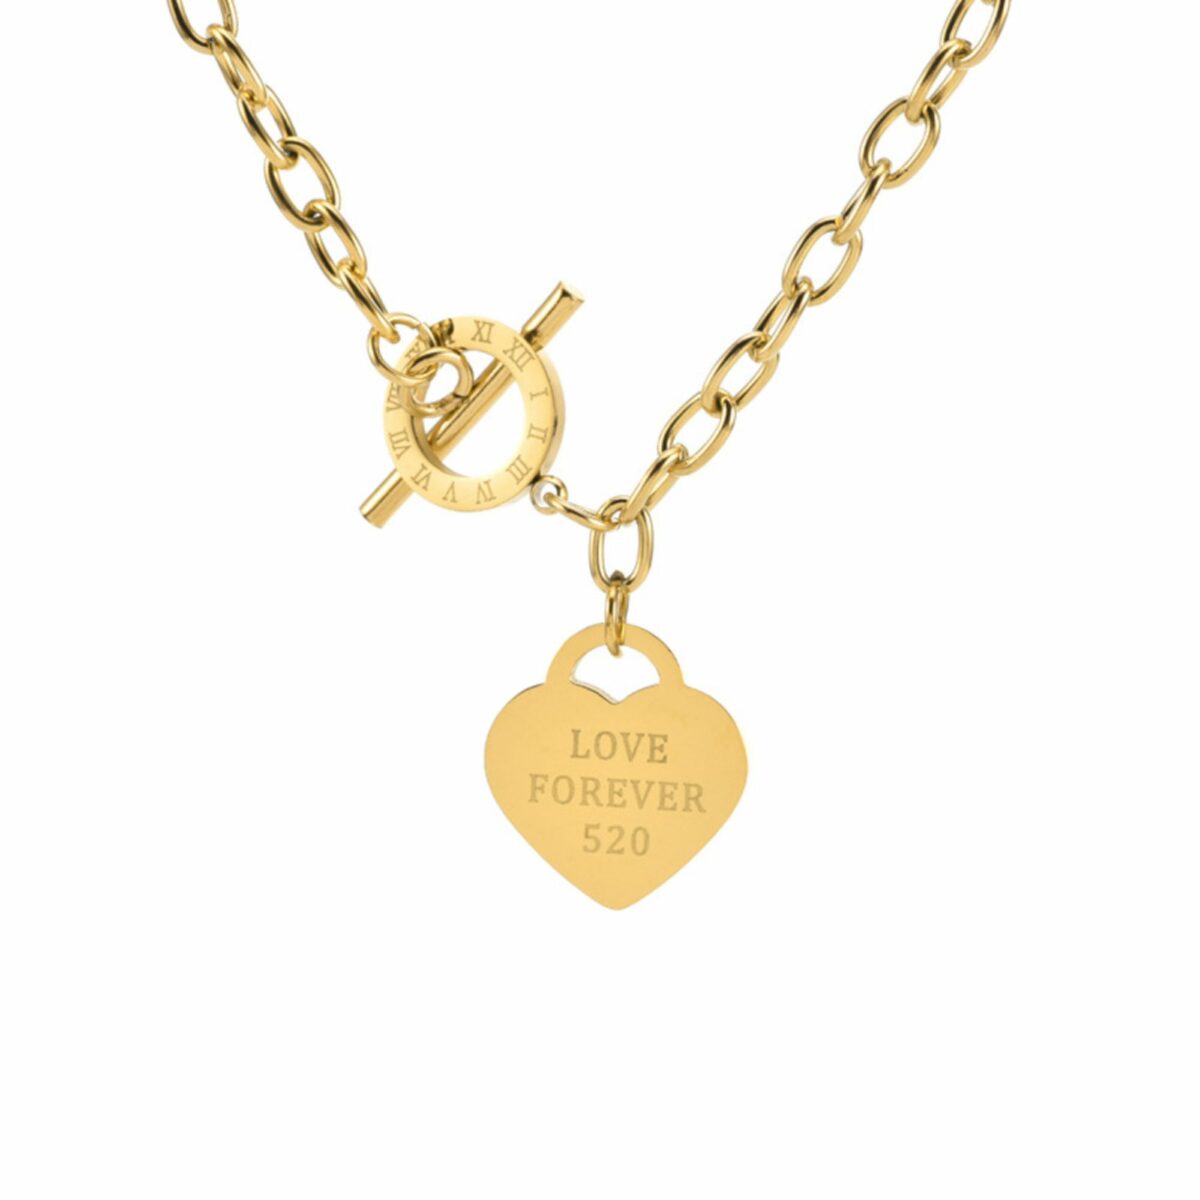 https://m.clubbella.co/product/gold-forever-heart-pendant-necklace/ 1674978432962